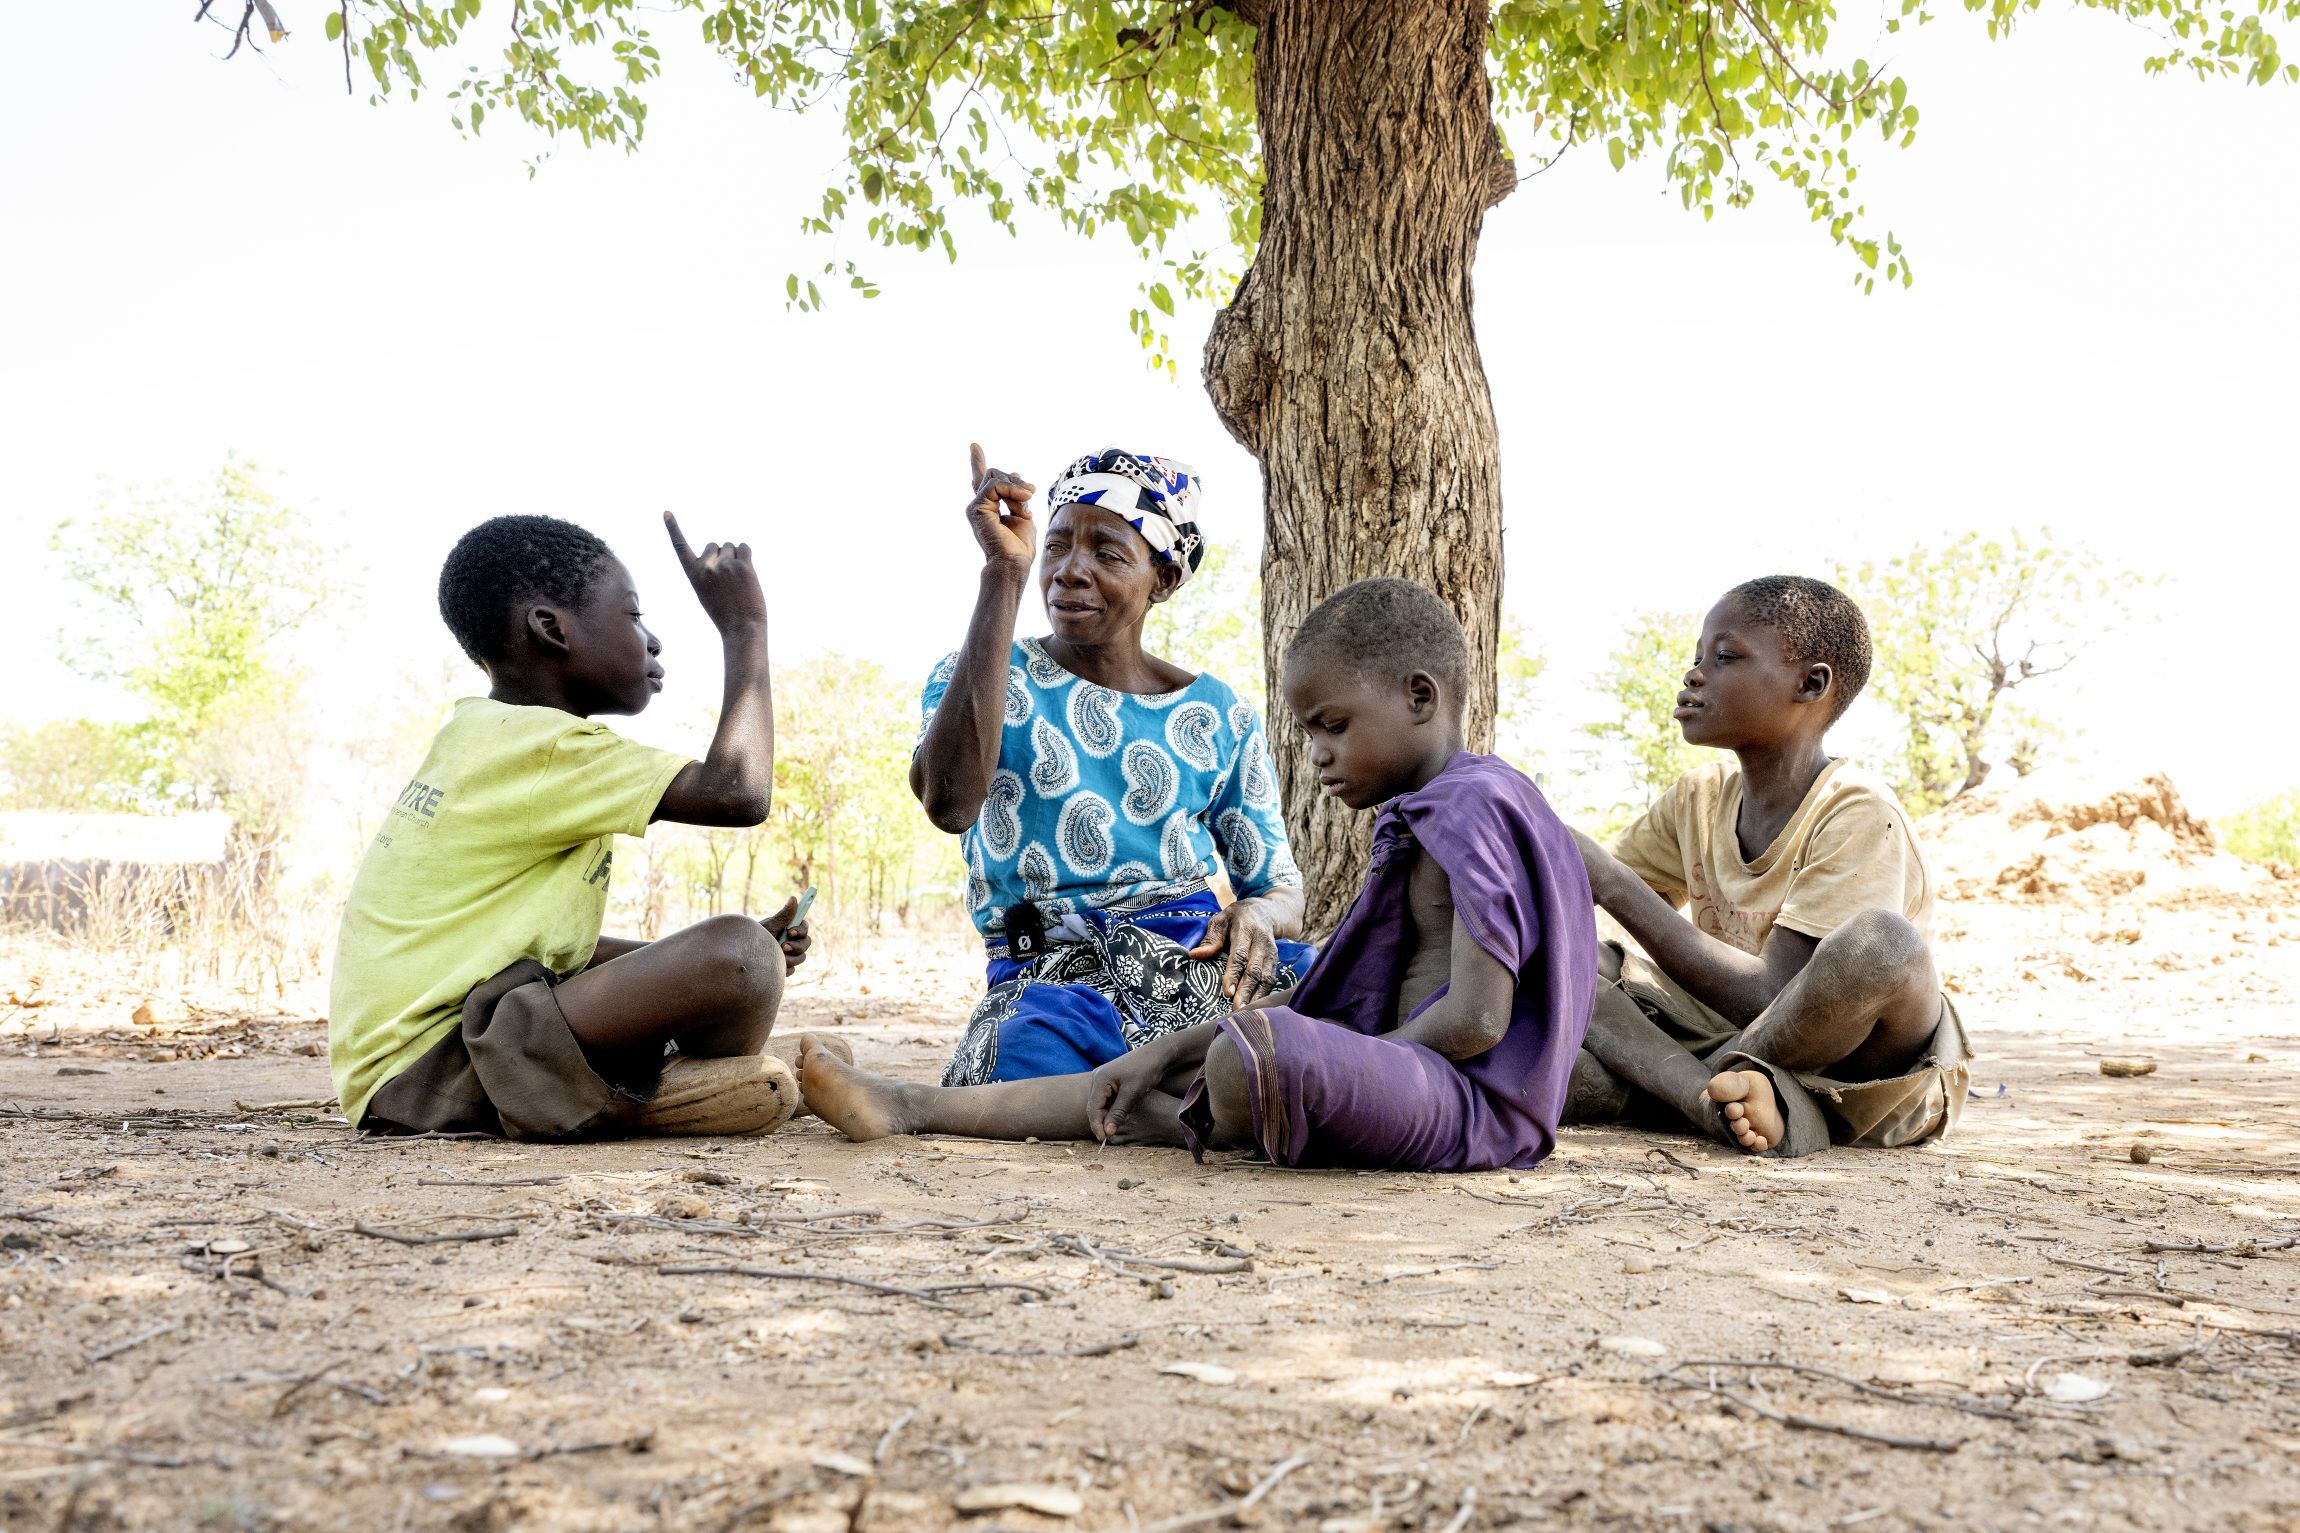 Fatima sitting in the ground with children in Malawi